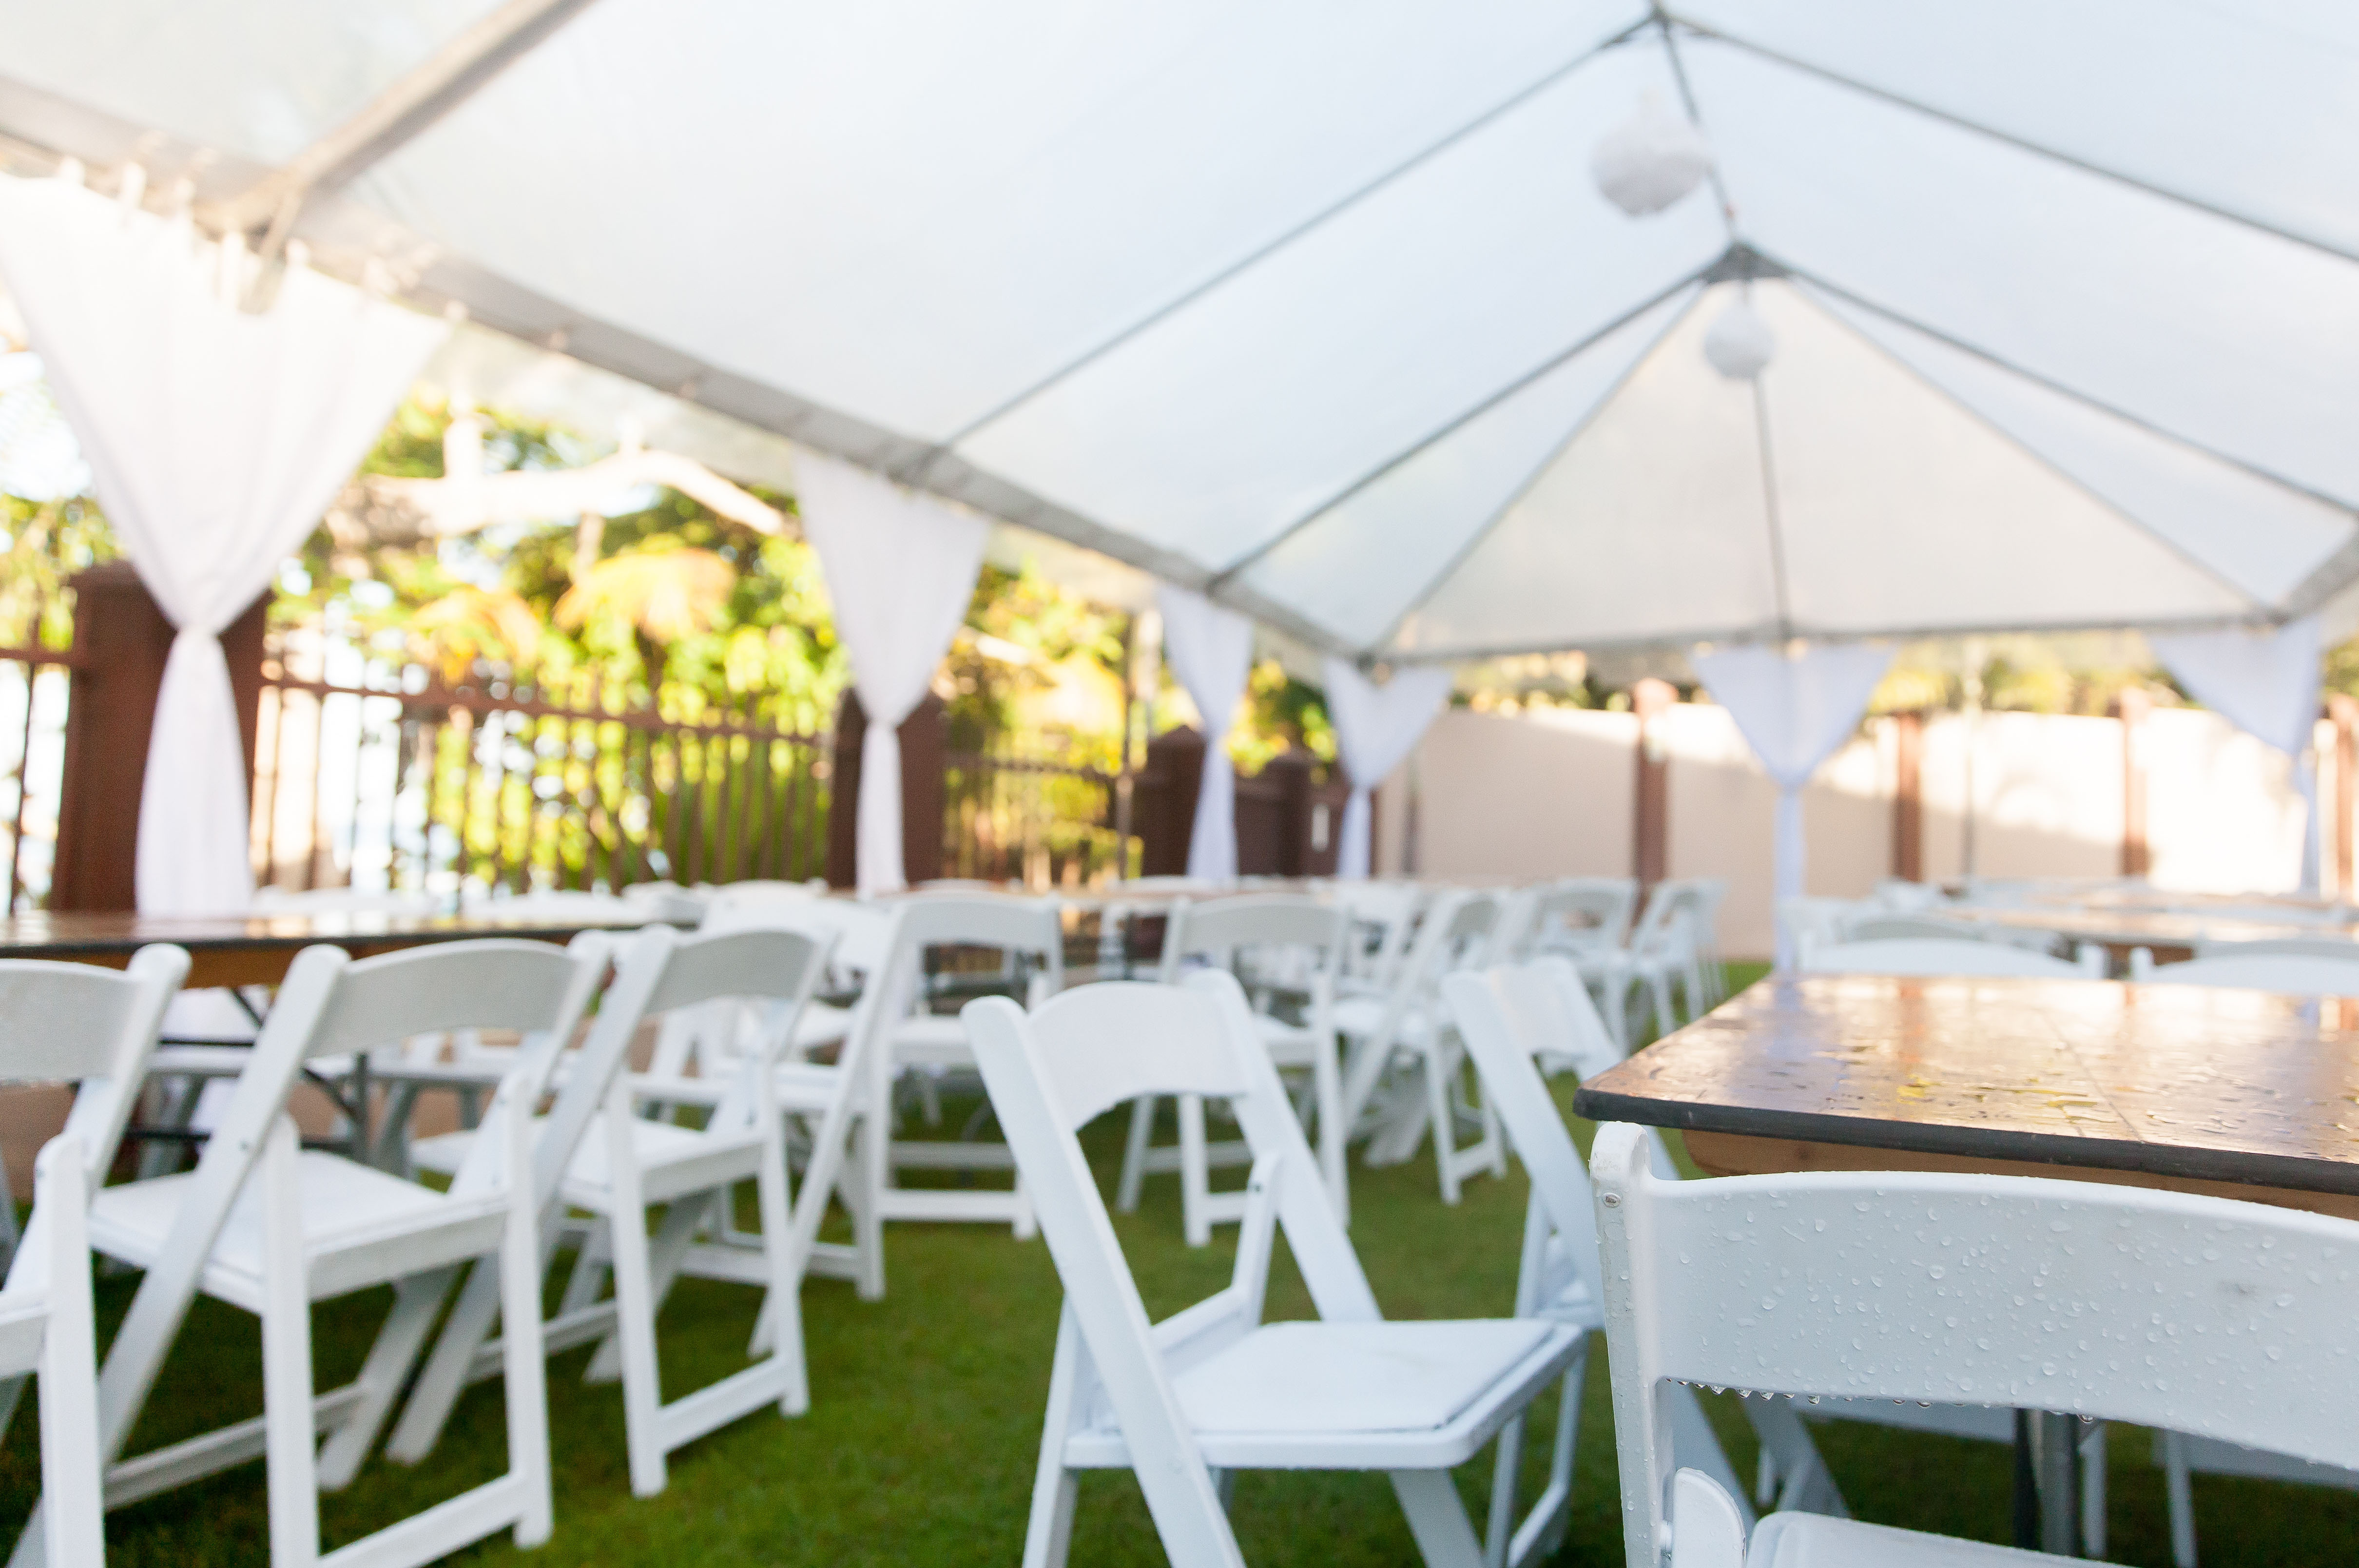 Wedding Tent - A group of chairs and tables under a white tent.